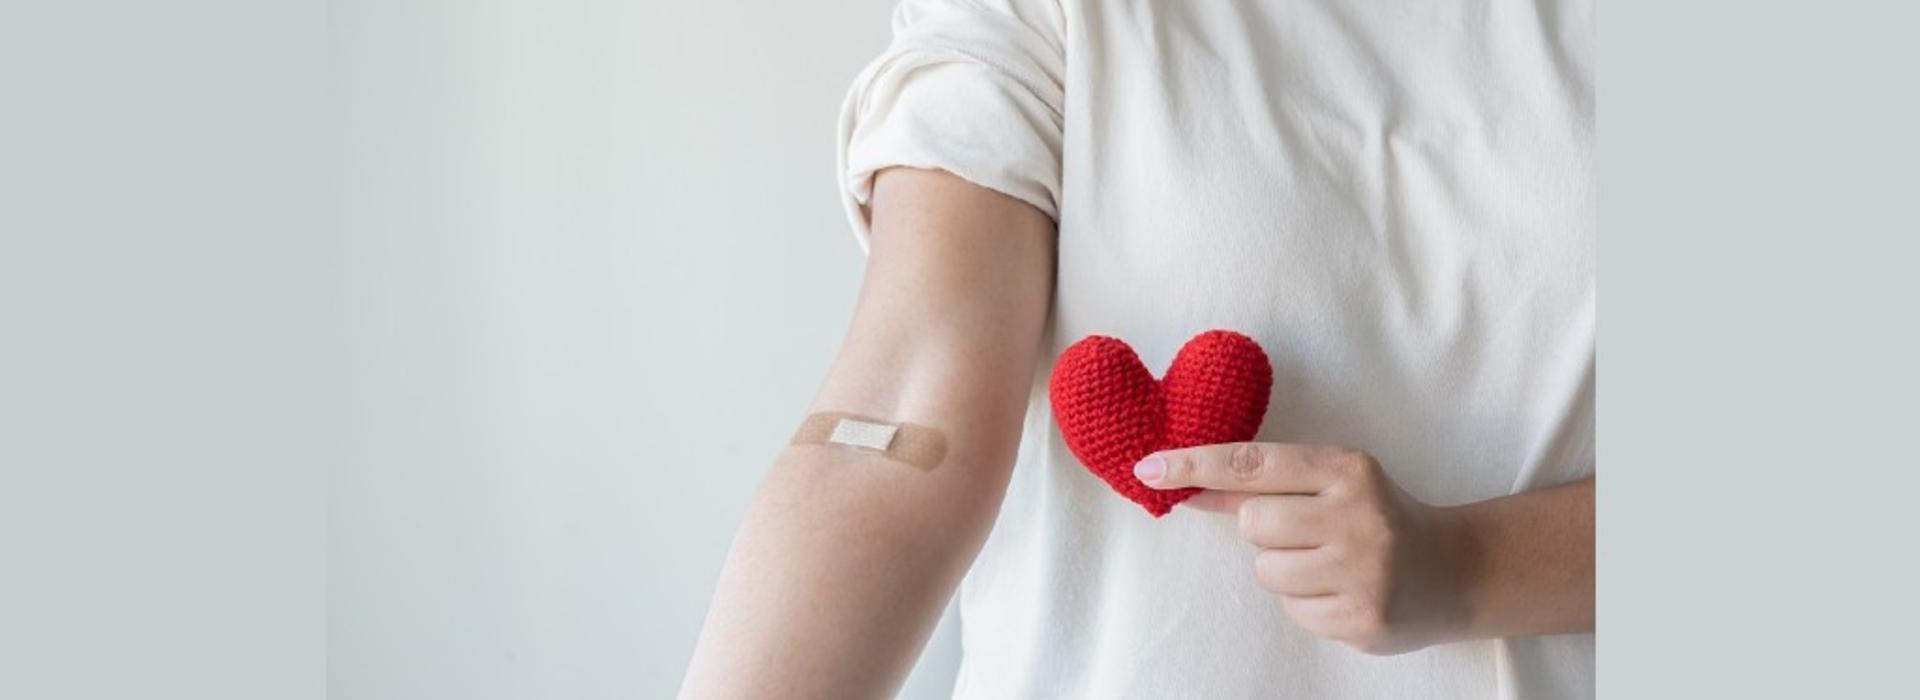 Image of a person with a white shirt, only their torso showing. In one hand they hold a knitted, red heart while their other arm is outstretched showing a bandaid over the crook of their elbow.